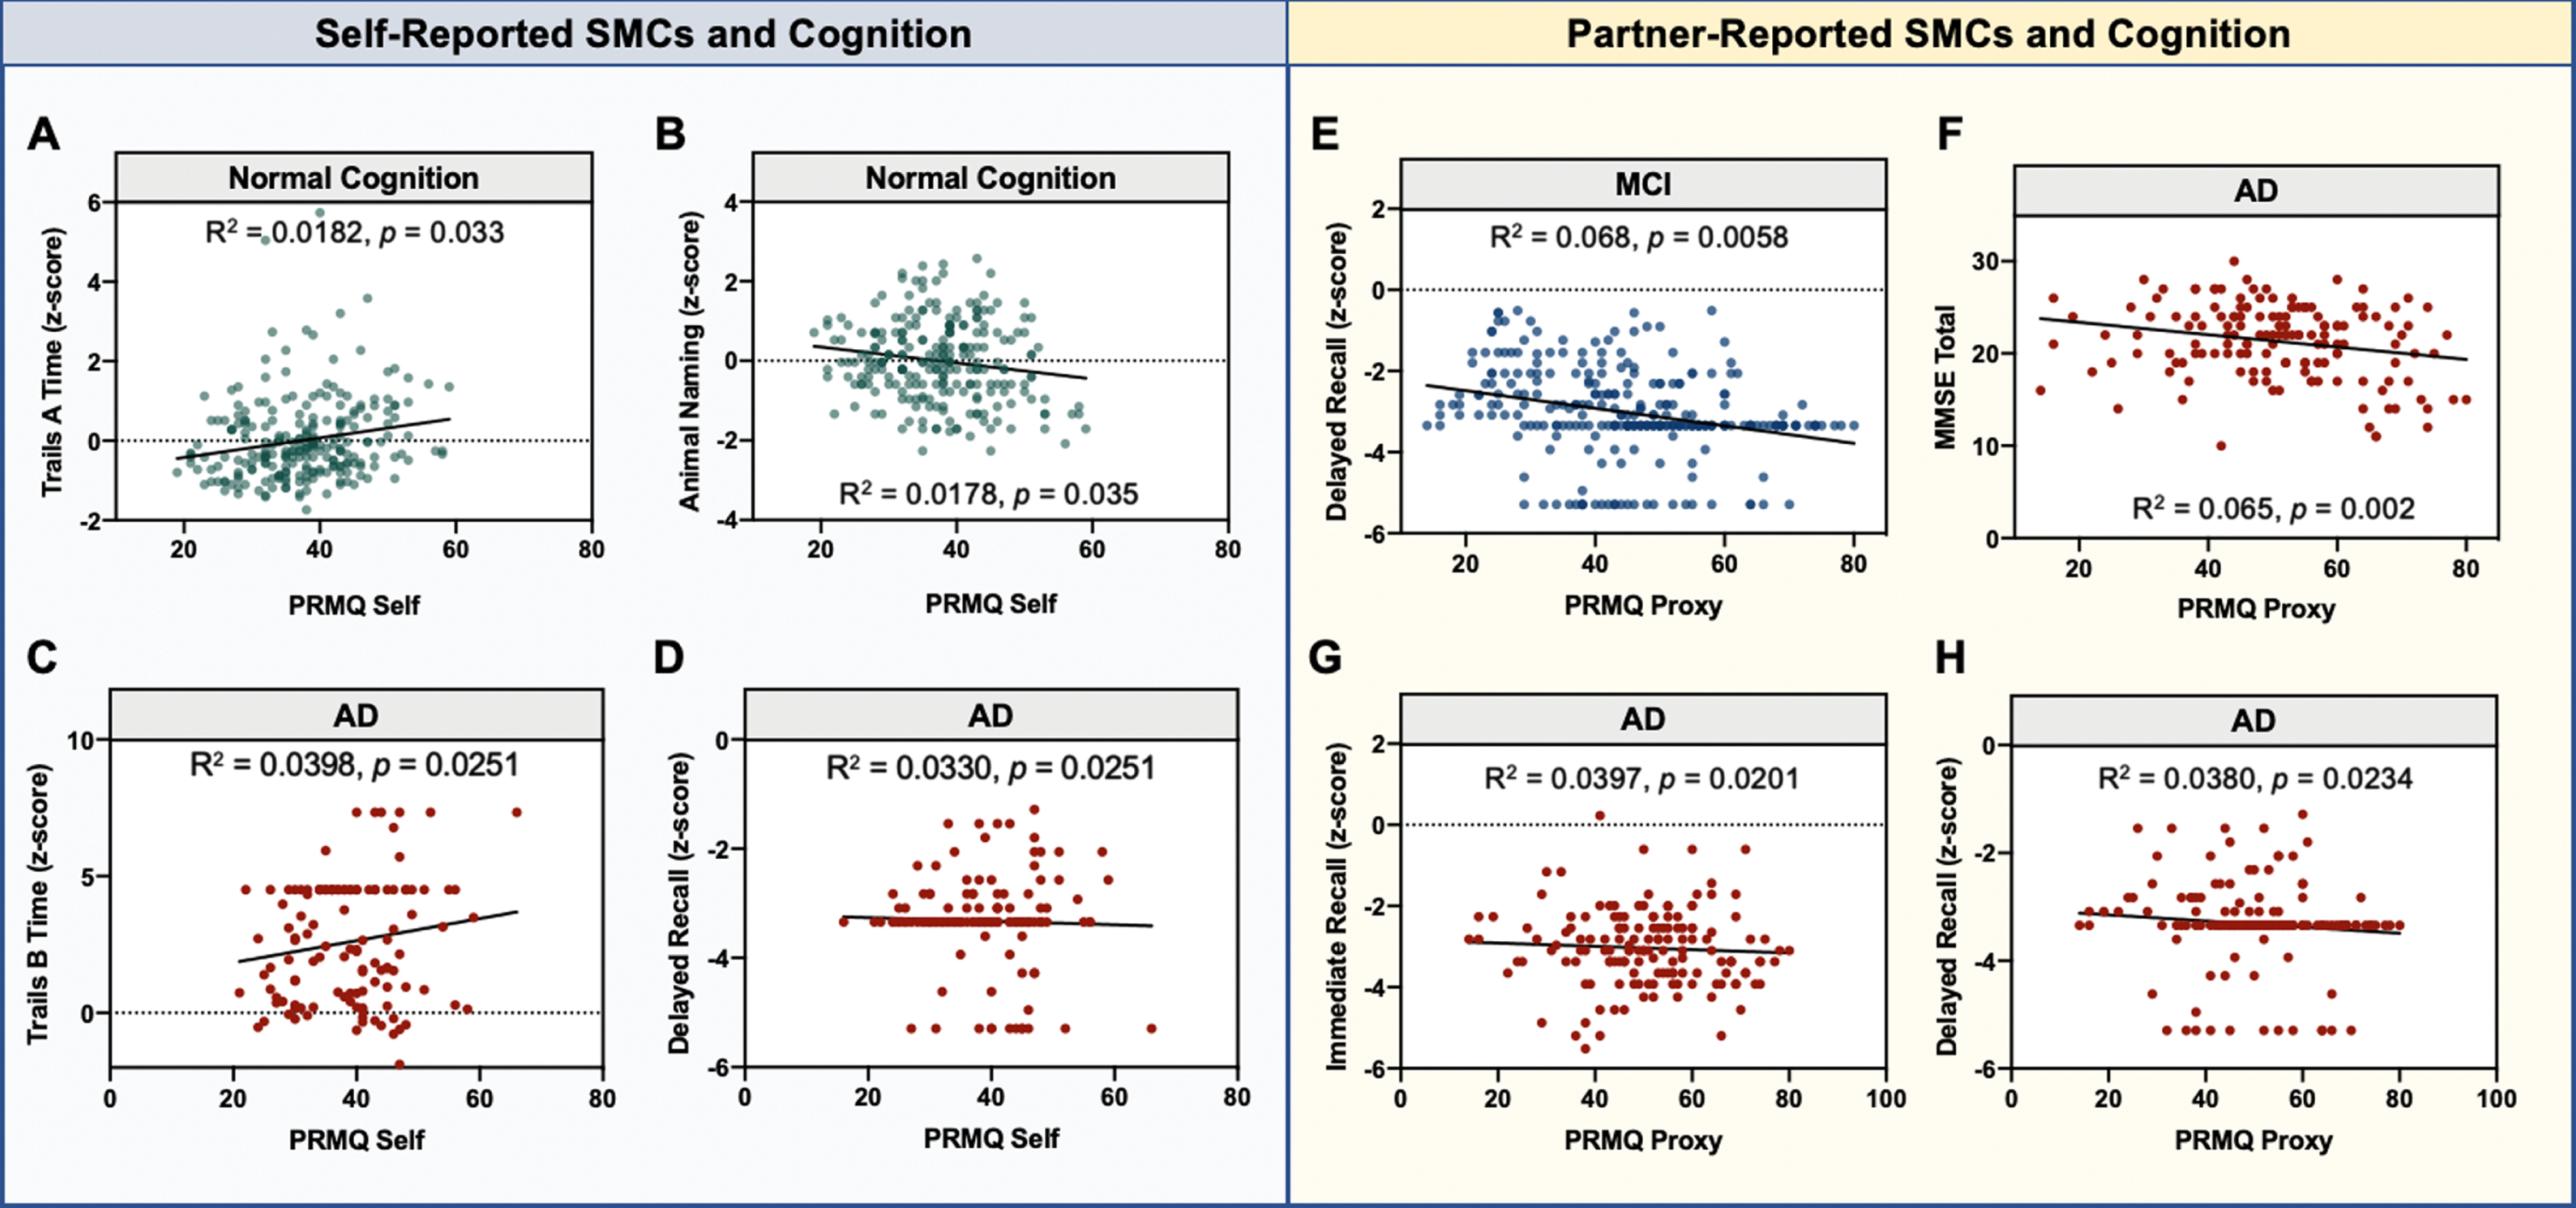 Significant Associations between SMCs and cognition at baseline. Partial correlations were calculated between each SMC and cognitive measure across diagnostic groups. All reported R2 values are adjusted for age, sex, race, education, and GDS. p-values are for the SMC term in the model. The left panel includes statistically significant relationships between self-reported SMCs and cognitive measures (A–D), and the right panel includes those for informant-reported SMCs (E–H). The diagnostic category in which the partial correlation was performed is listed above the graph and is further denoted by the colors of the individual dots: normal cognition (NC), green; mild cognitive impairment (MCI), blue; Alzheimer’s disease (AD), red.